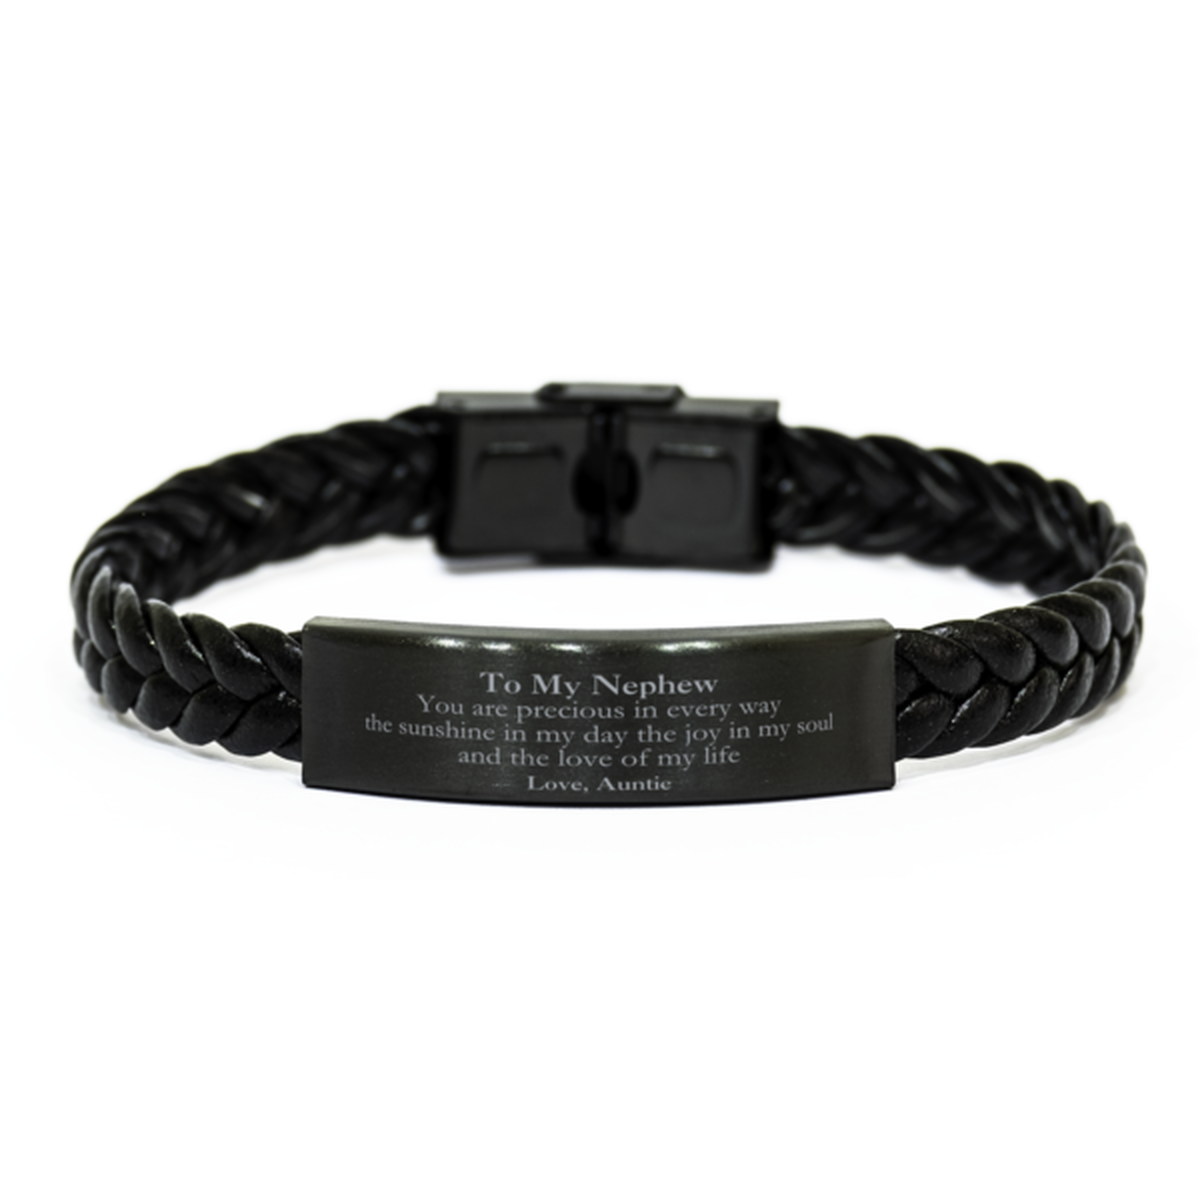 Graduation Gifts for Nephew Braided Leather Bracelet Present from Auntie, Christmas Nephew Birthday Gifts Nephew You are precious in every way the sunshine in my day. Love, Auntie